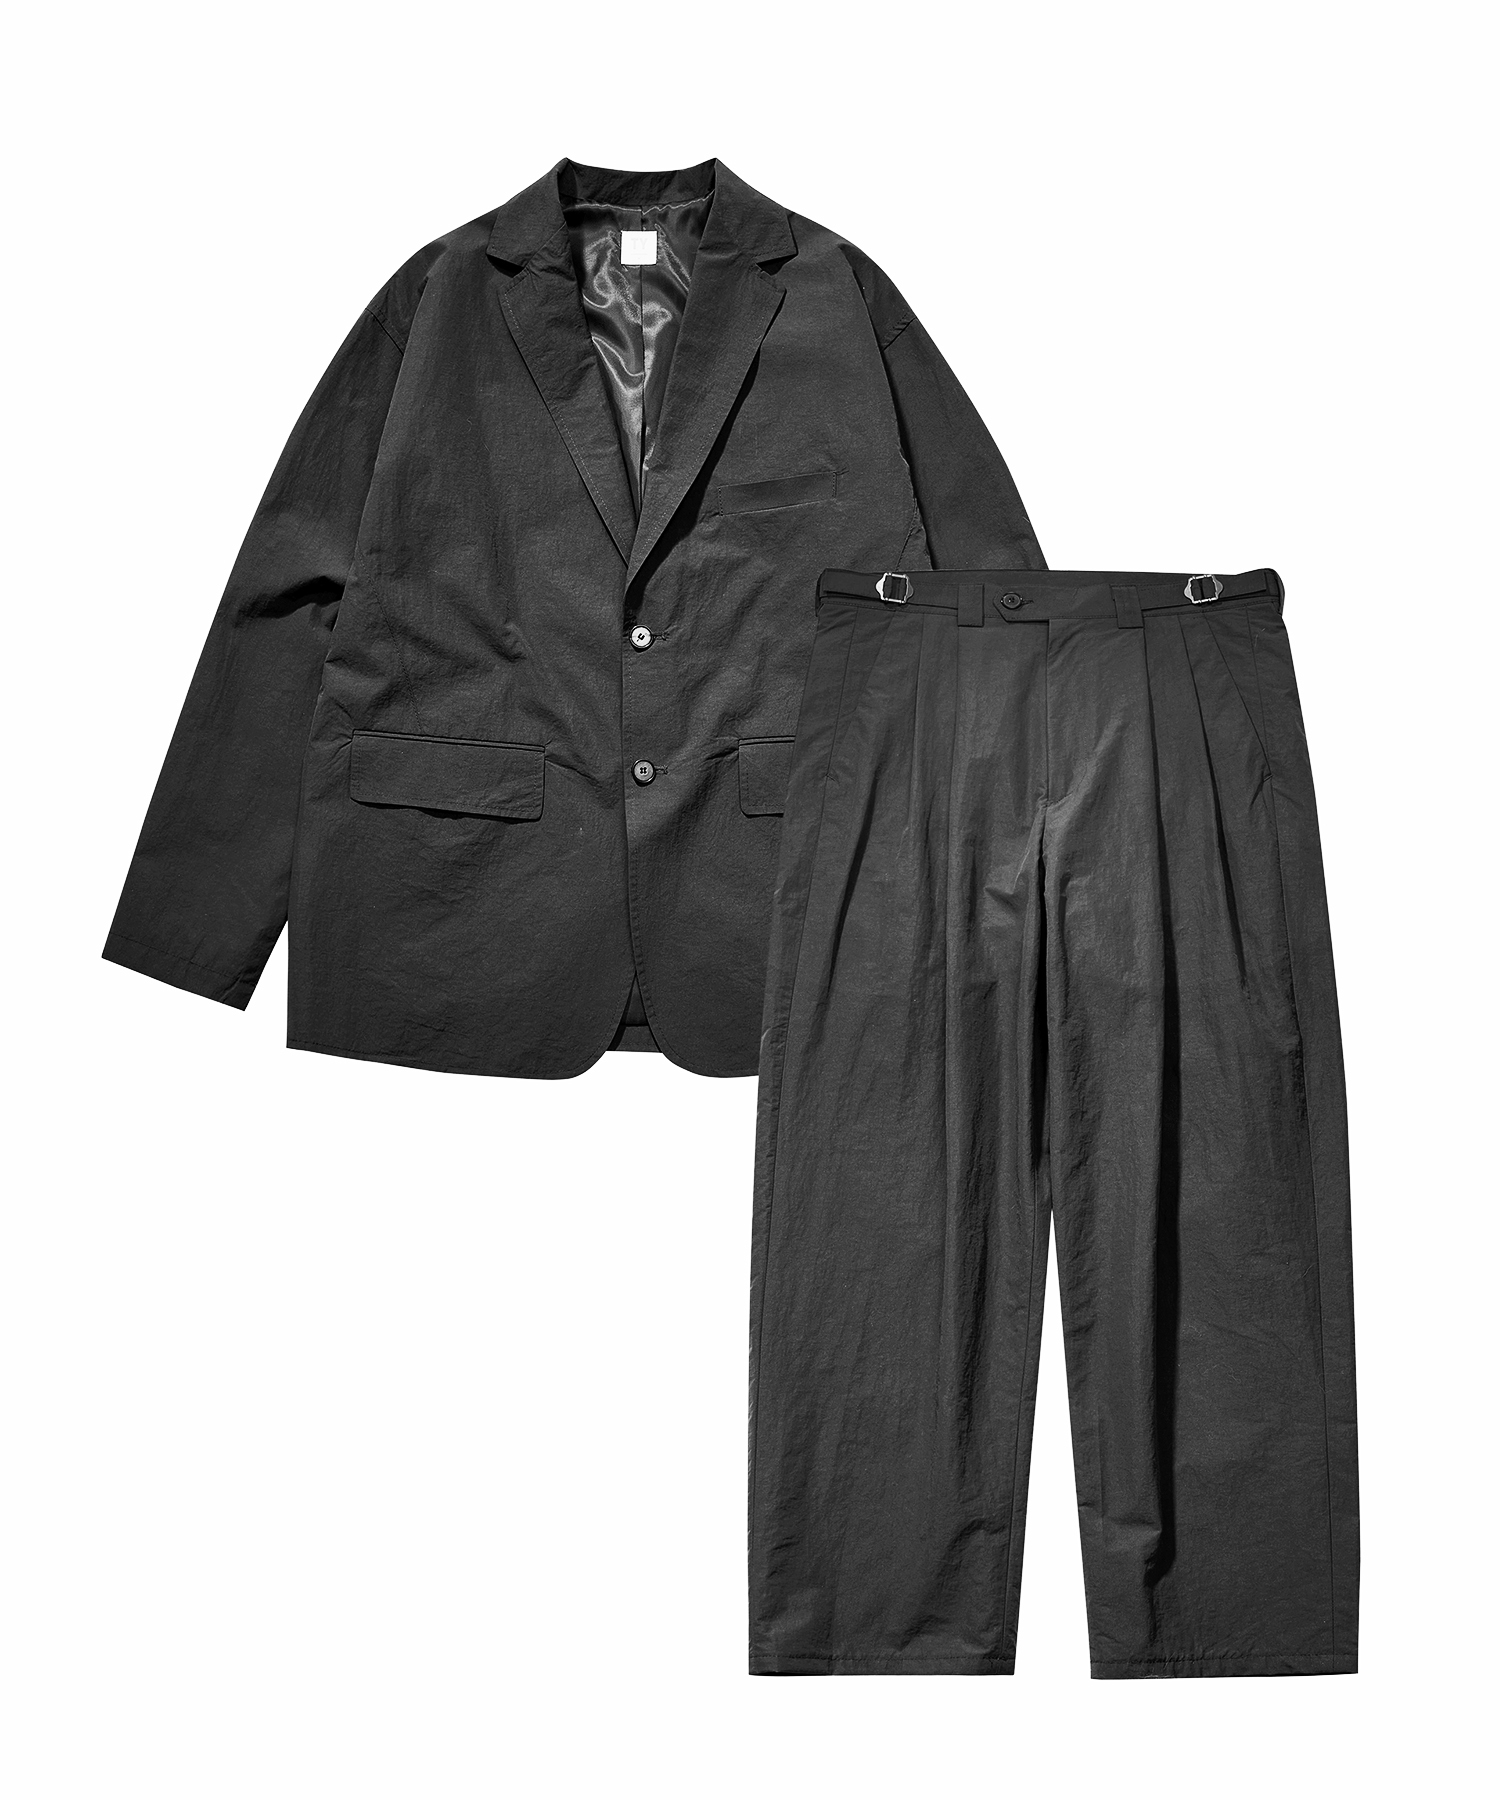 Office casual sports two button jacket setup_Black